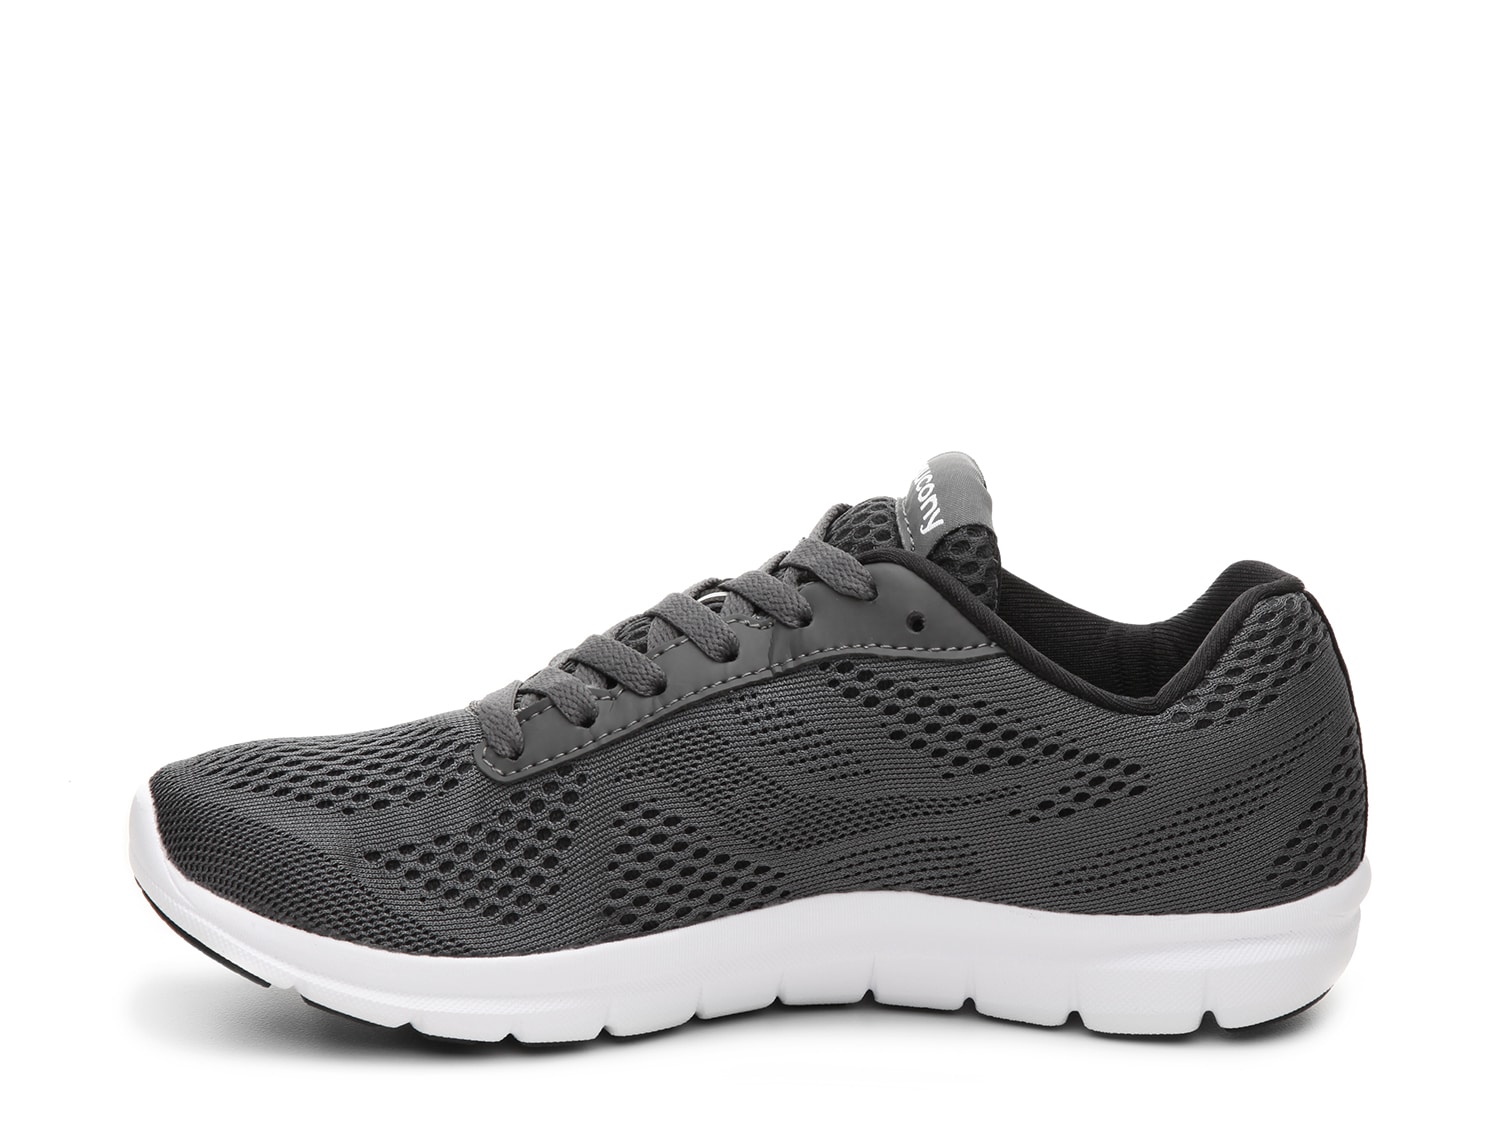 saucony grid ideal running shoe